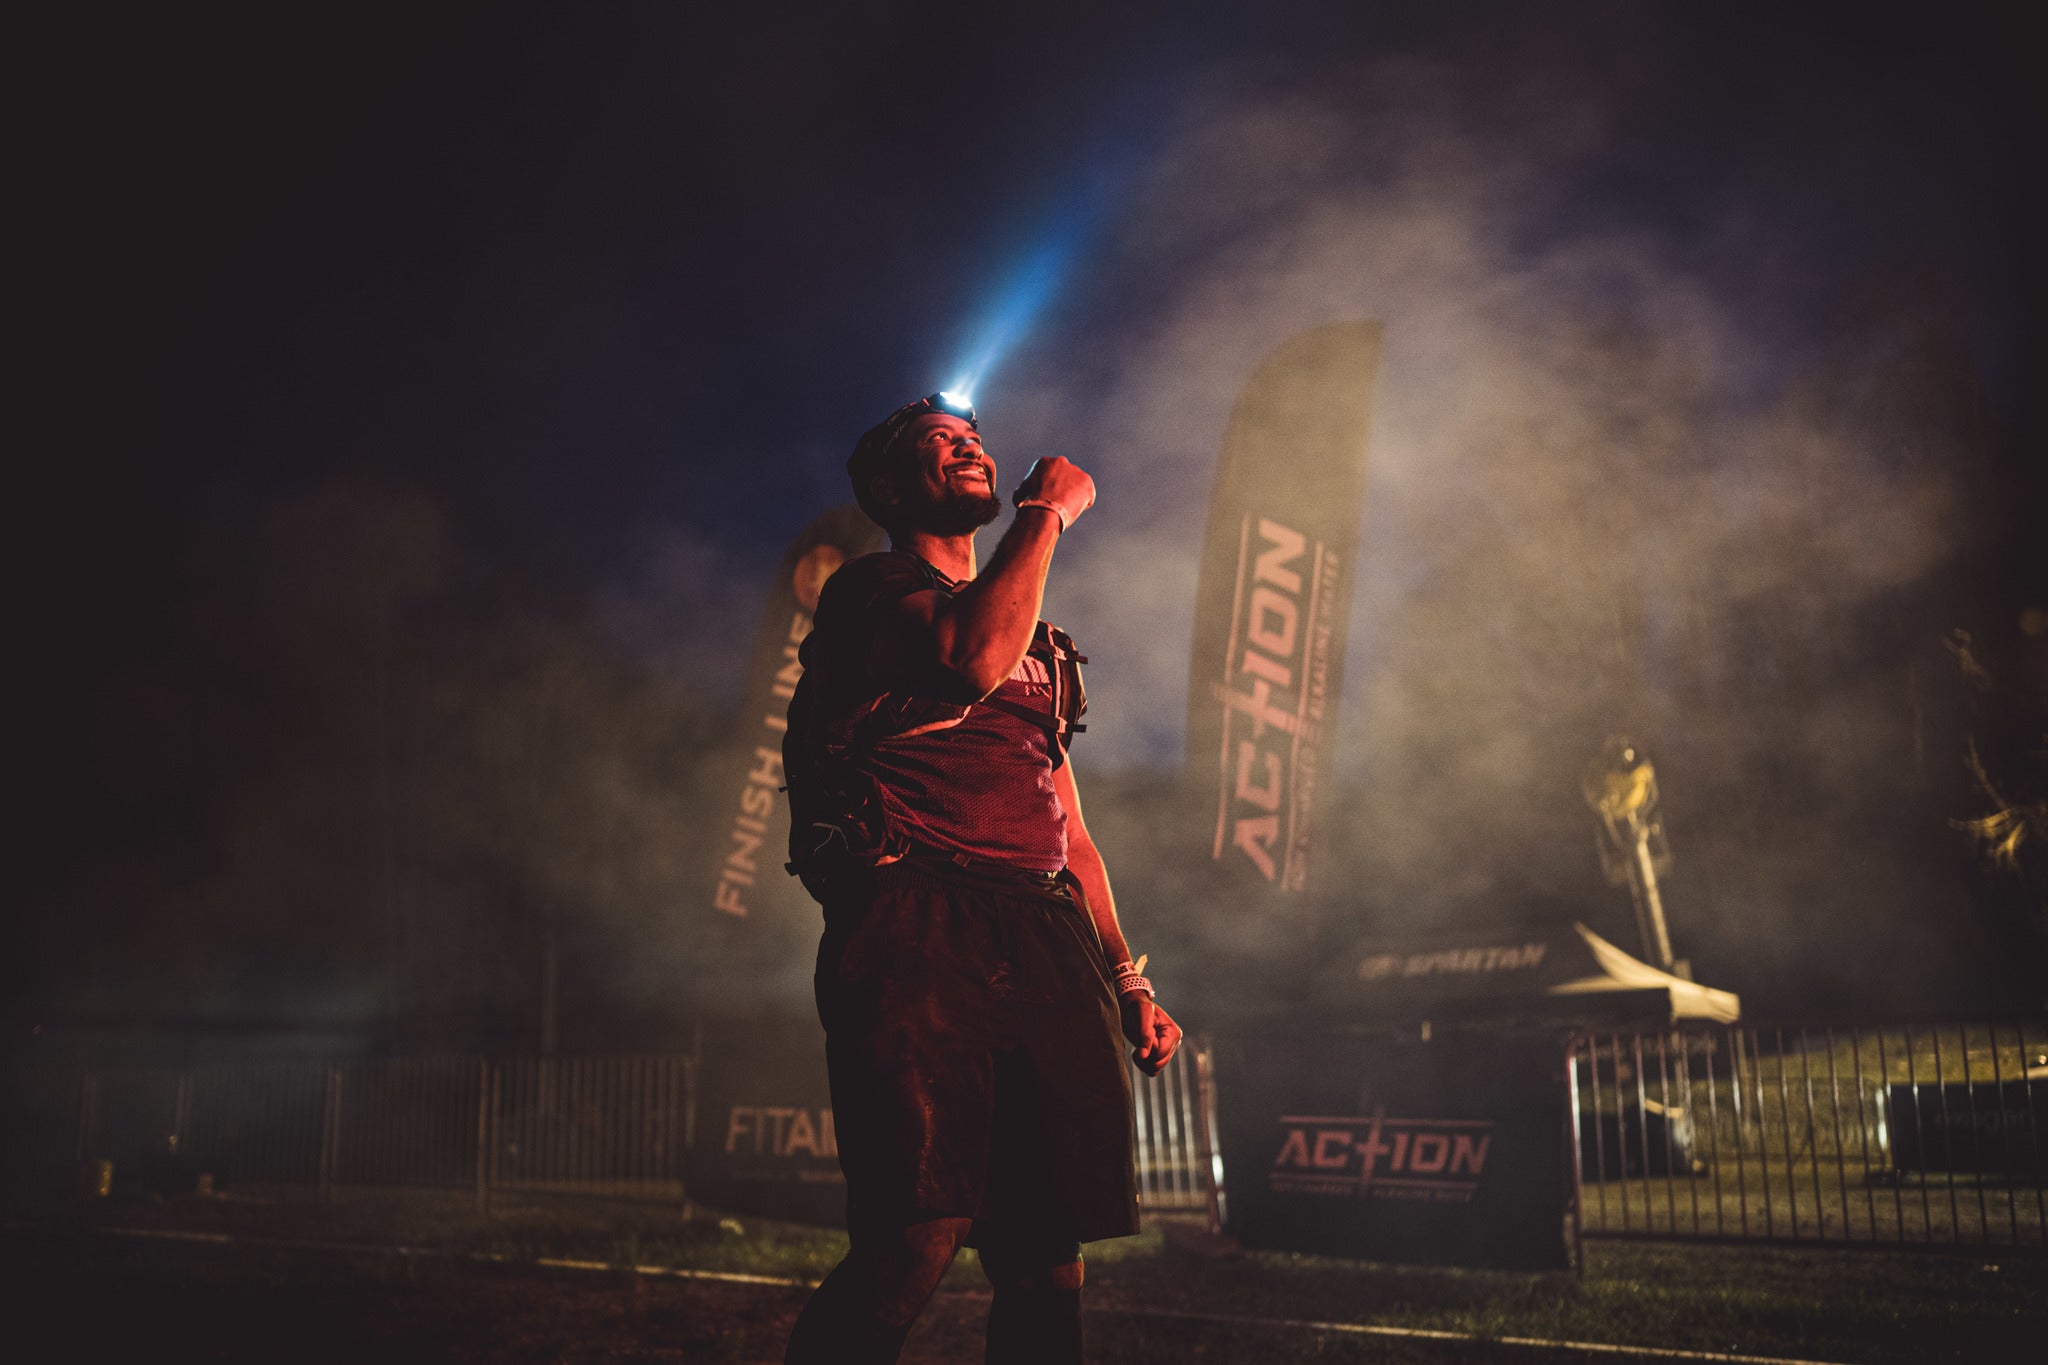 a Spartan racer finishes an Ultra 50K race in the dark wearing a headlamp